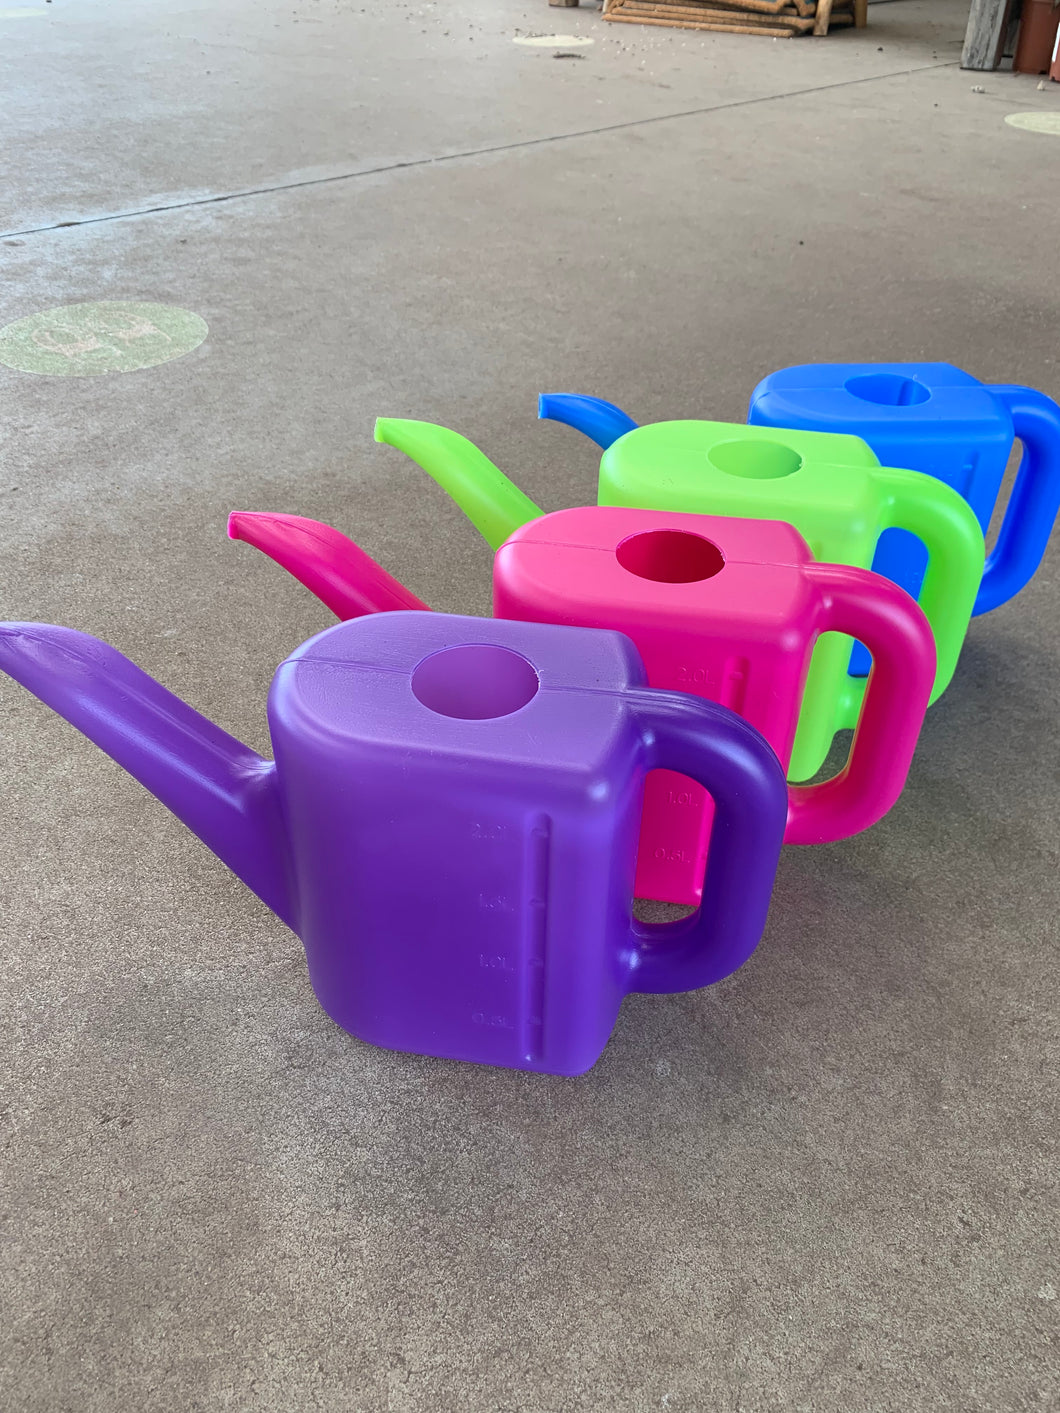 Watering cans - 2 Litre